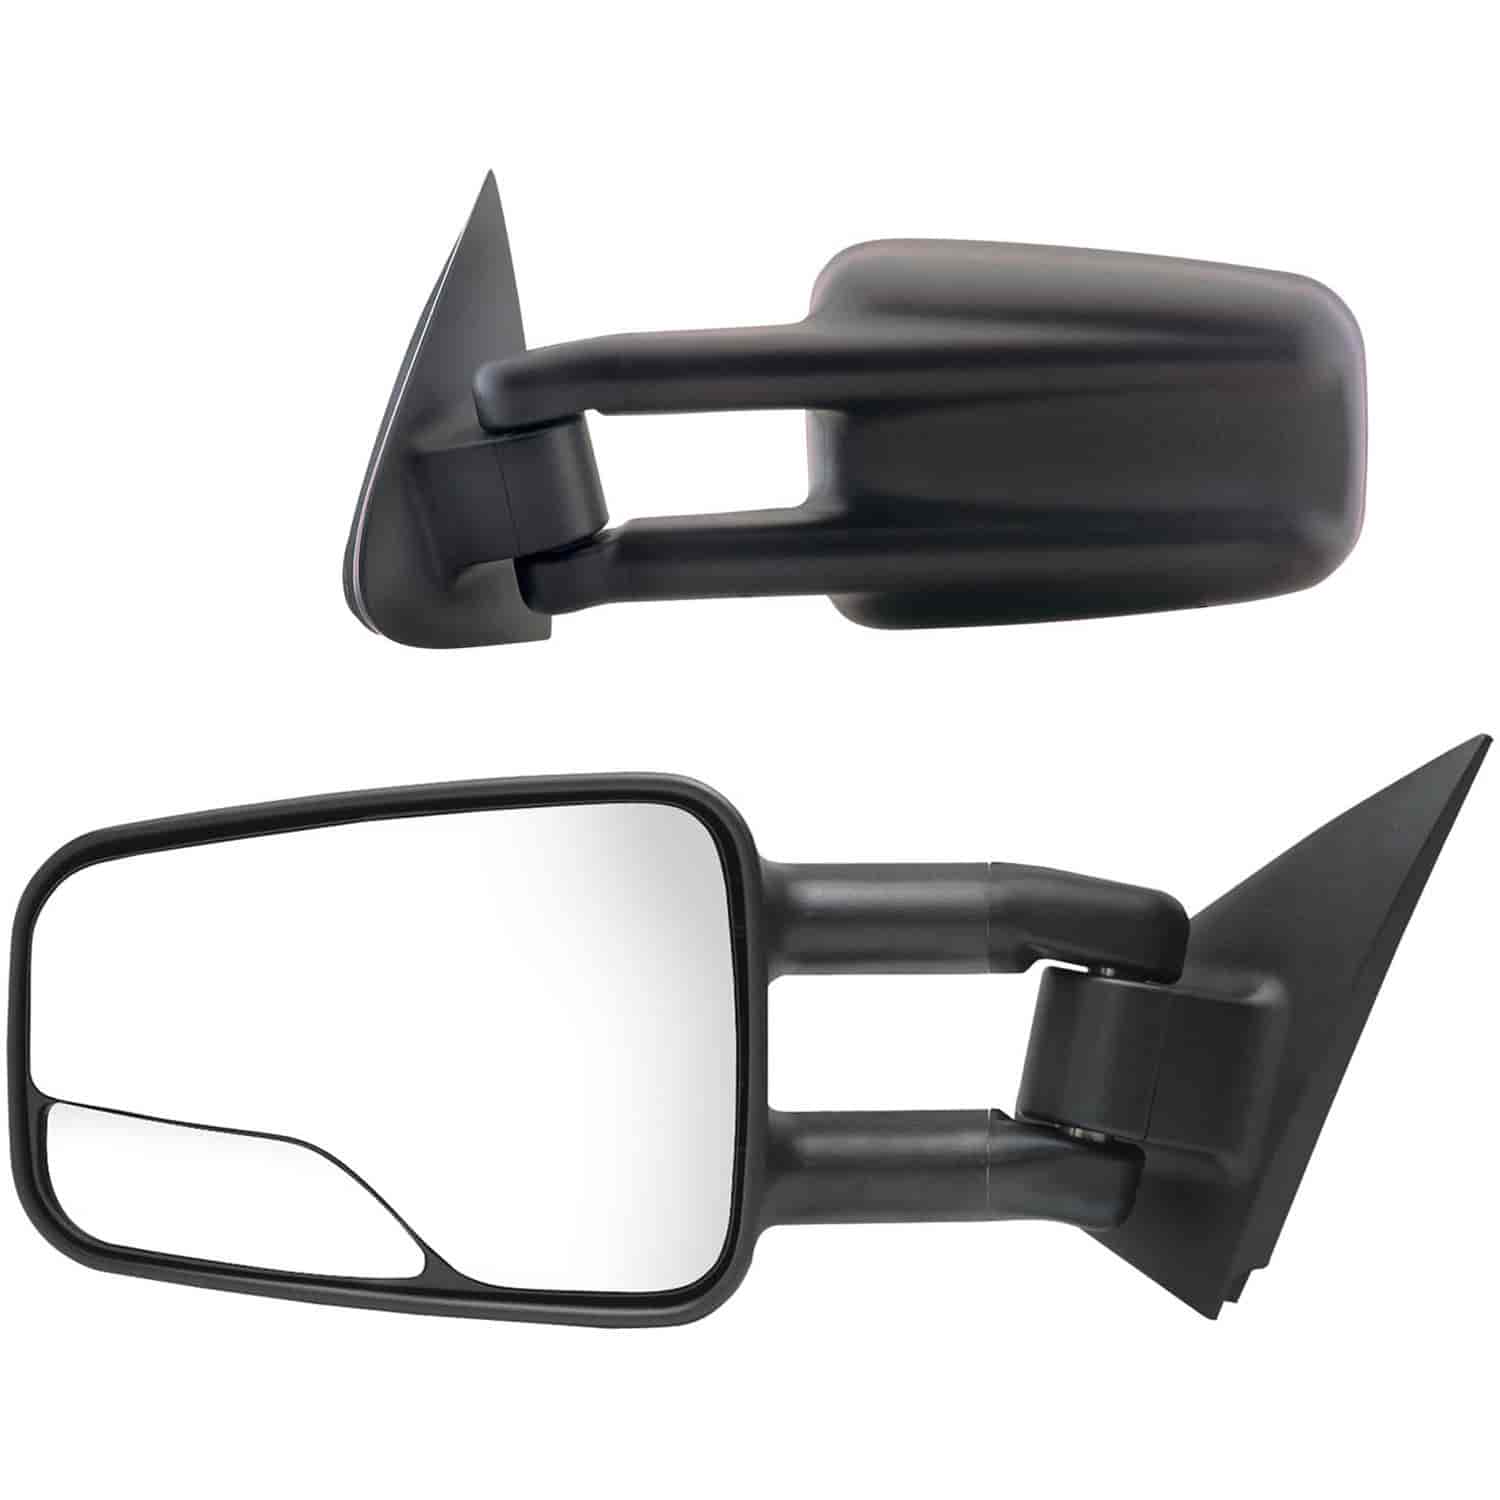 OEM Style Replacement Mirror Set Fits Select 1999-2007 Chevy Silverado, GMC Sierra, Cadillac Escalade [Extendable]